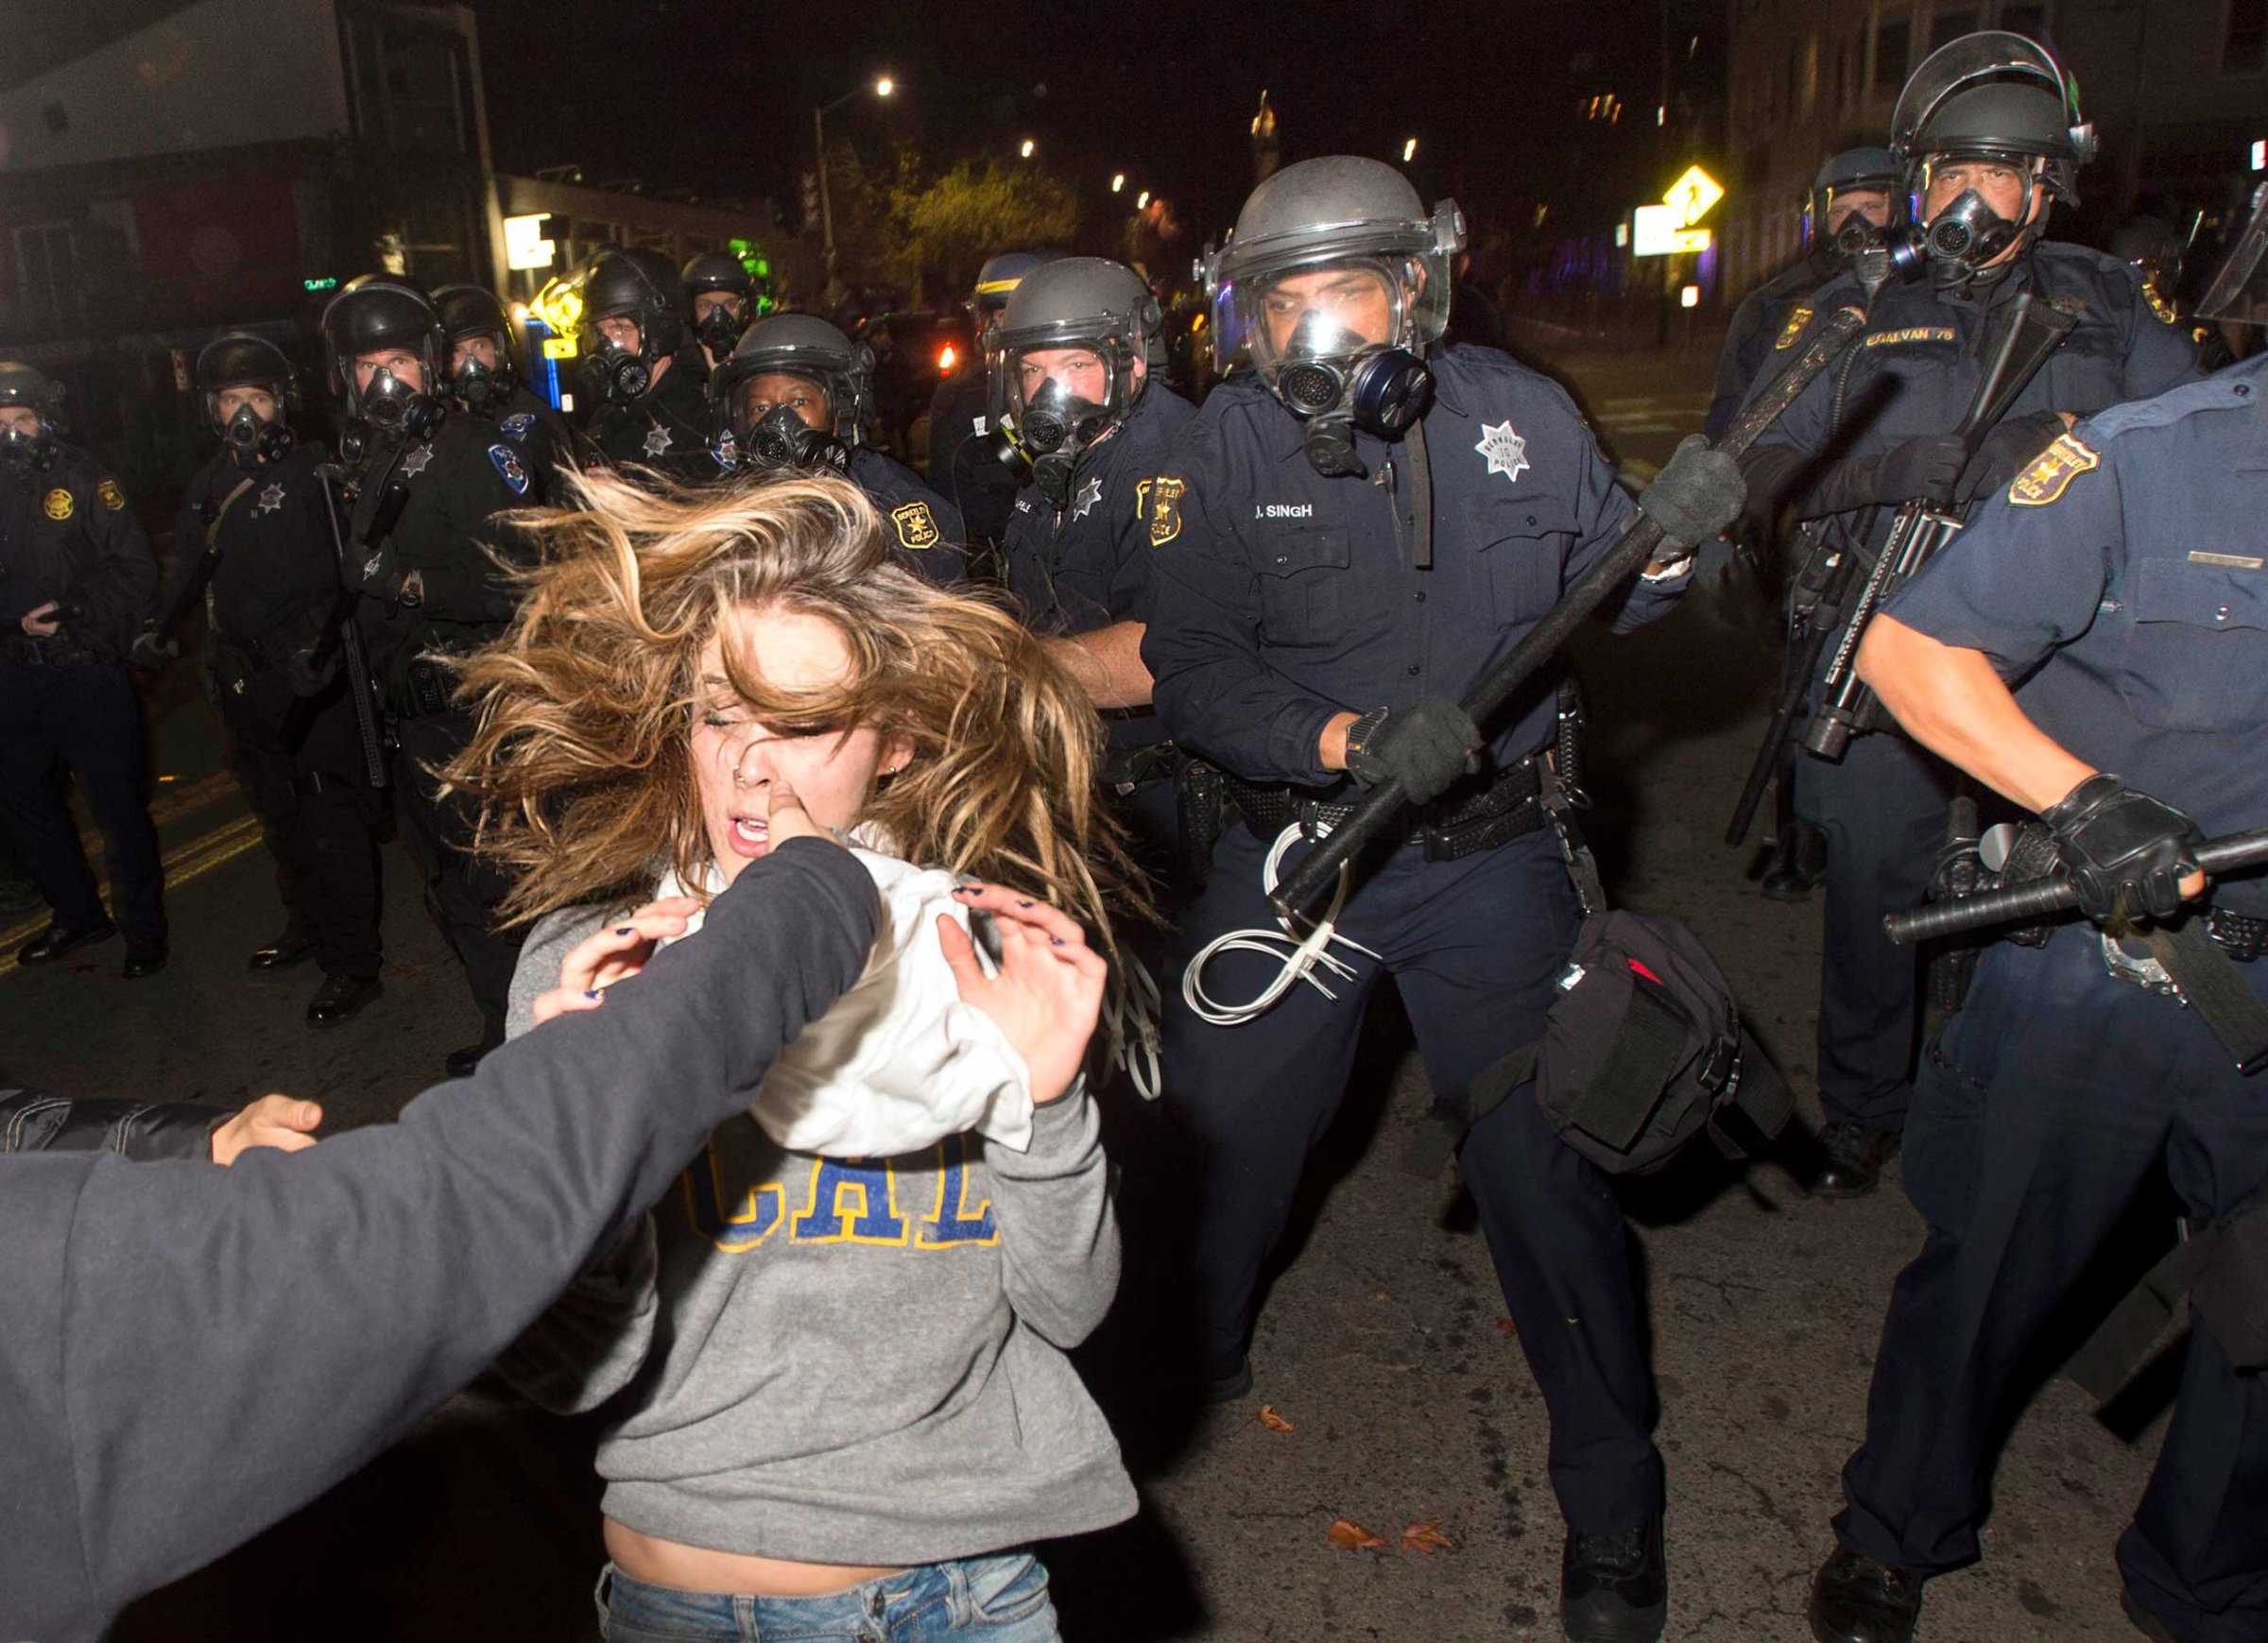 A protester flees as police officers try to disperse a crowd comprised largely of student demonstrators during a protest against police violence in the U.S., in Berkeley